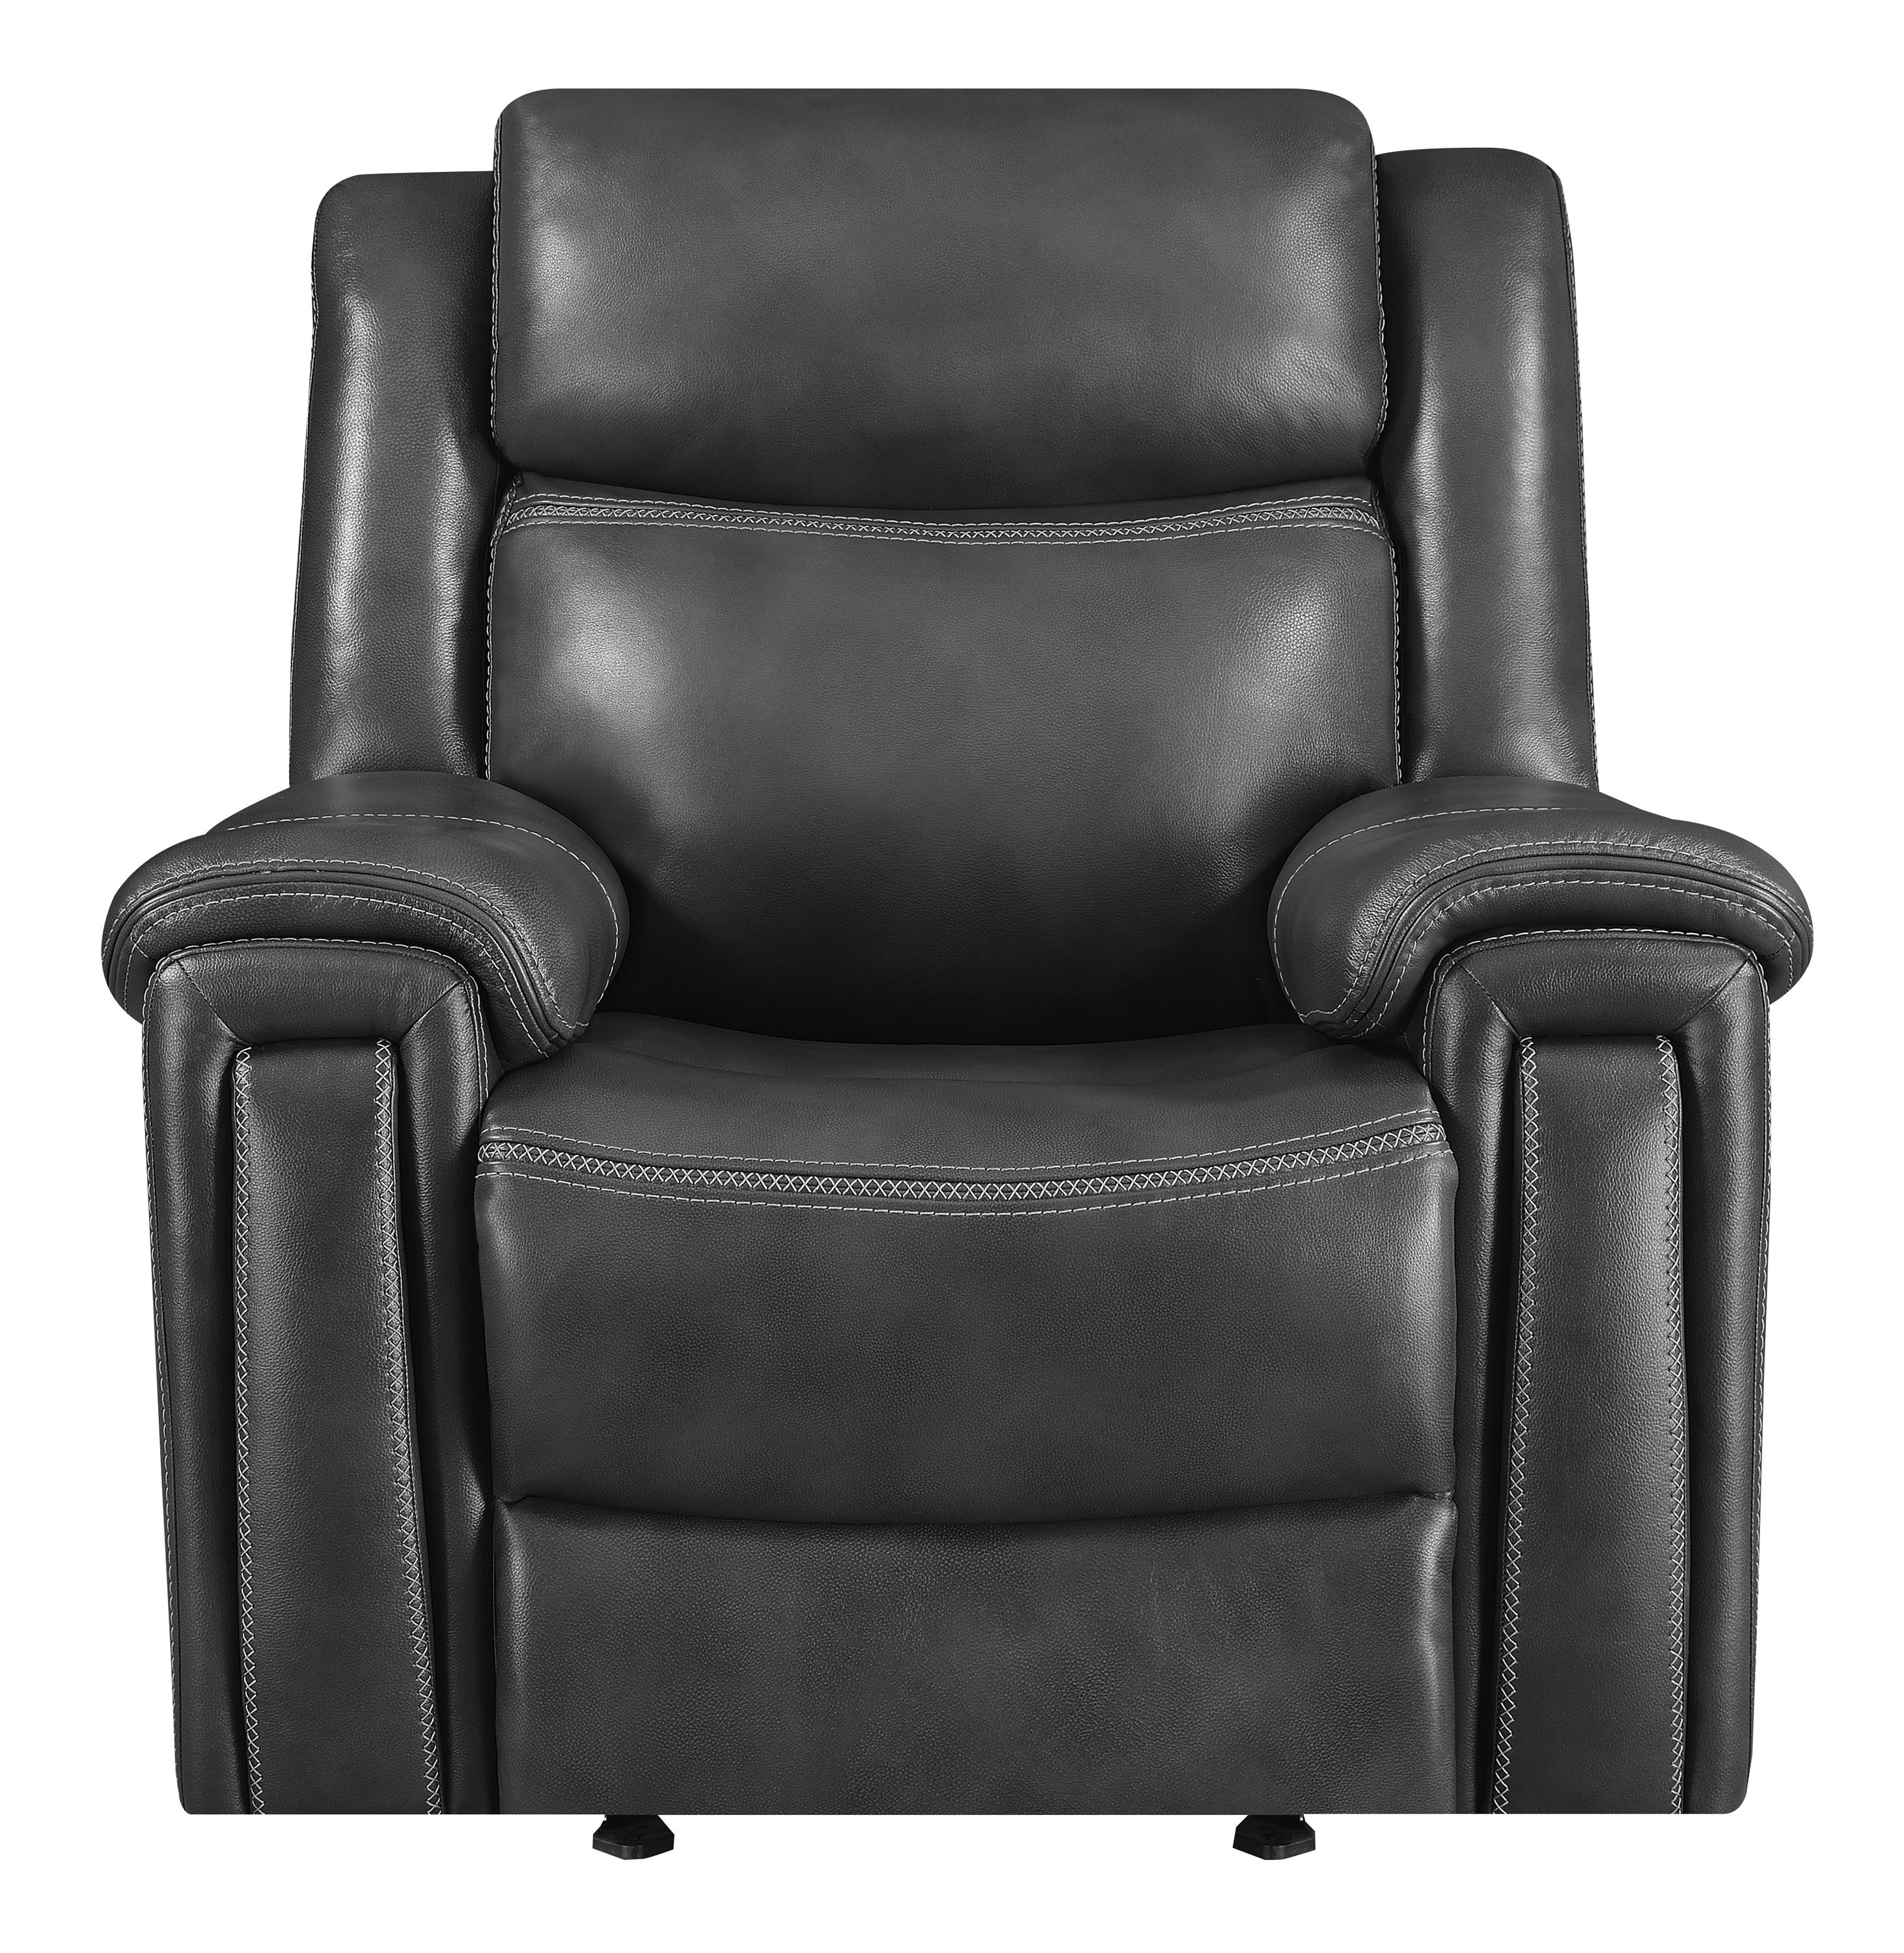 Transitional Power glider recliner 609323PP Shallowford 609323PP in Charcoal Leather